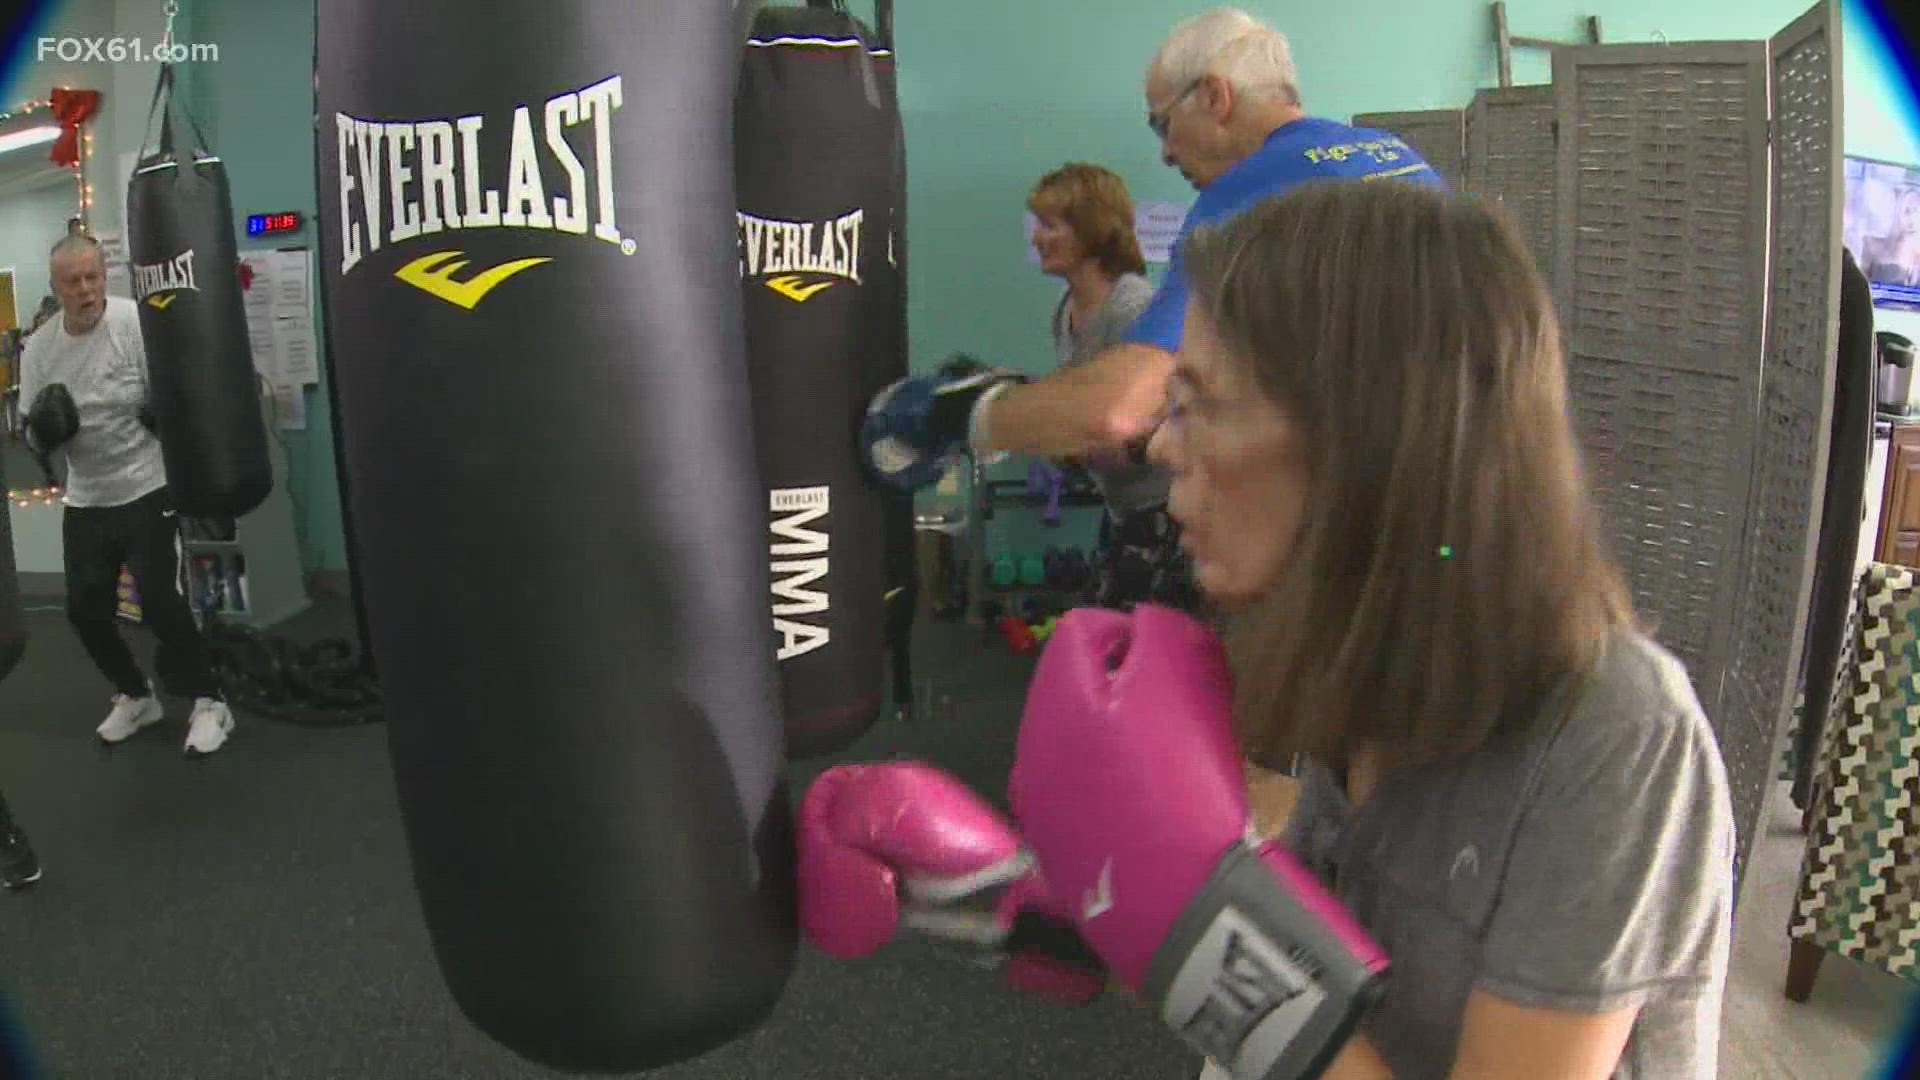 About a dozen athletes stricken with Parkinson’s disease are throwing jabs and uppercuts, all to try and get an upper hand on their symptoms.